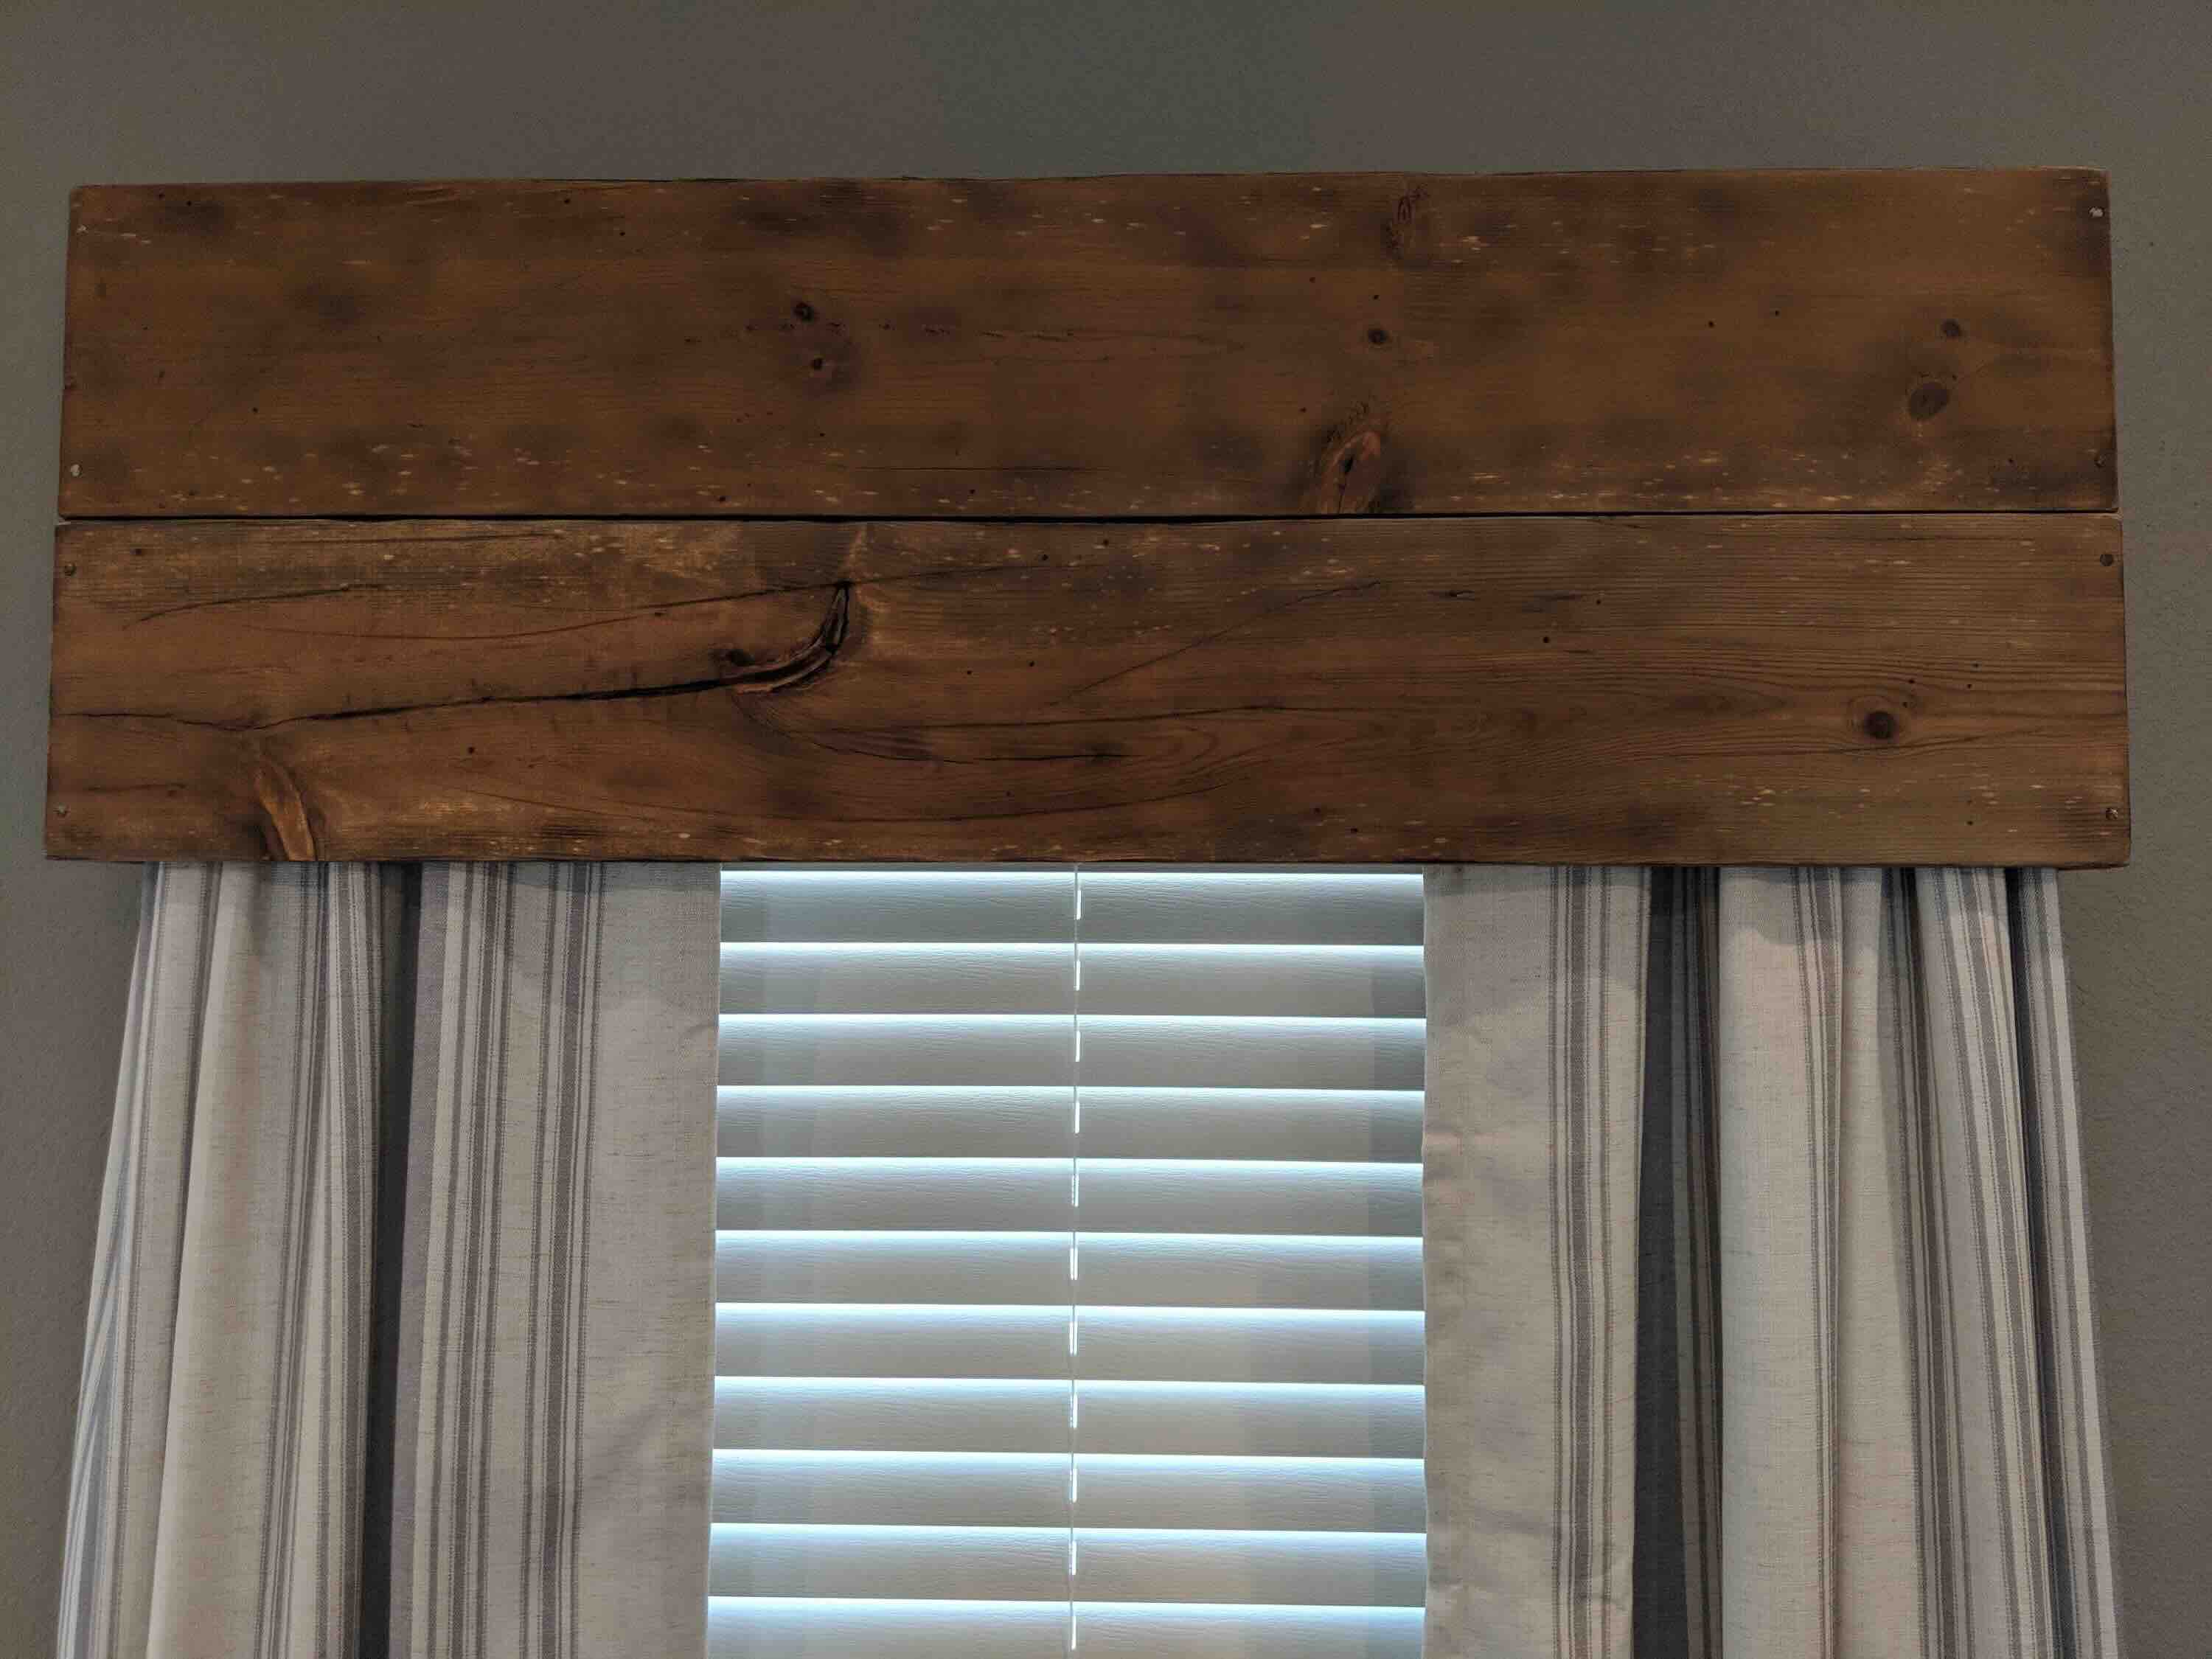 How To Measure For Valances